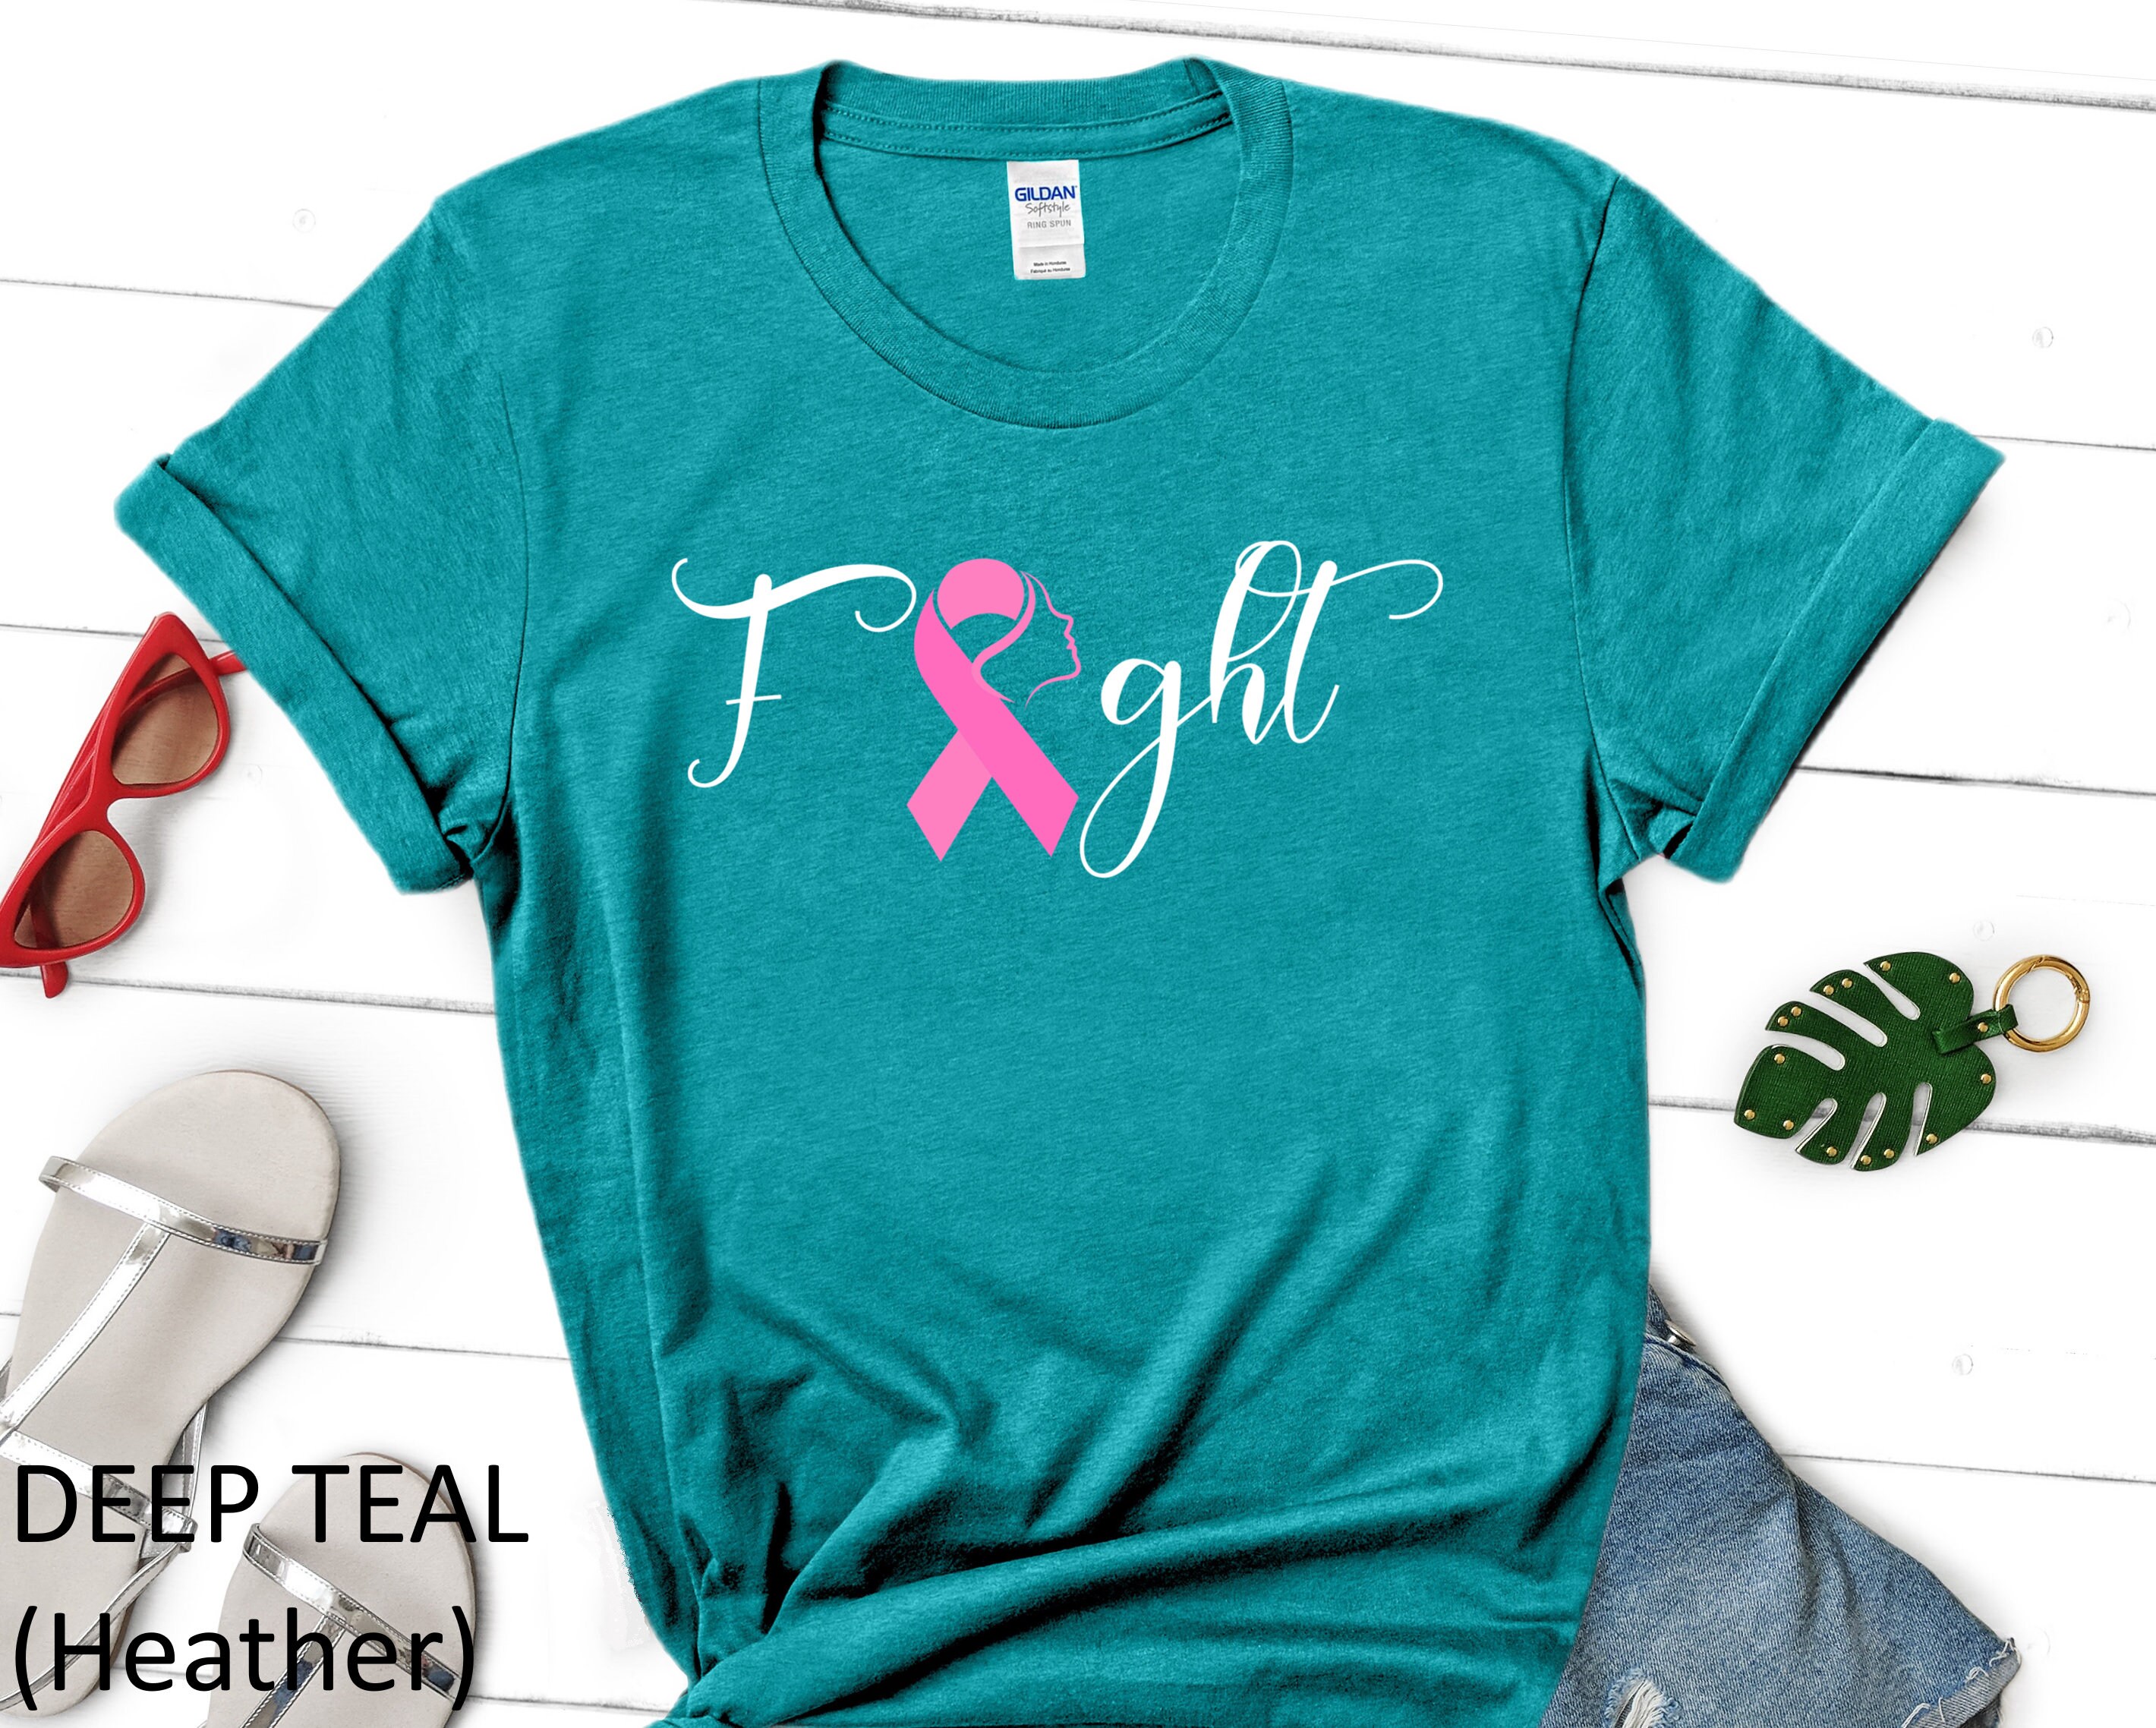 PERSONAL84 Breast Cancer Custom T Shirt She's A Breast Cancer Warrior She Is Me Personalized Gift